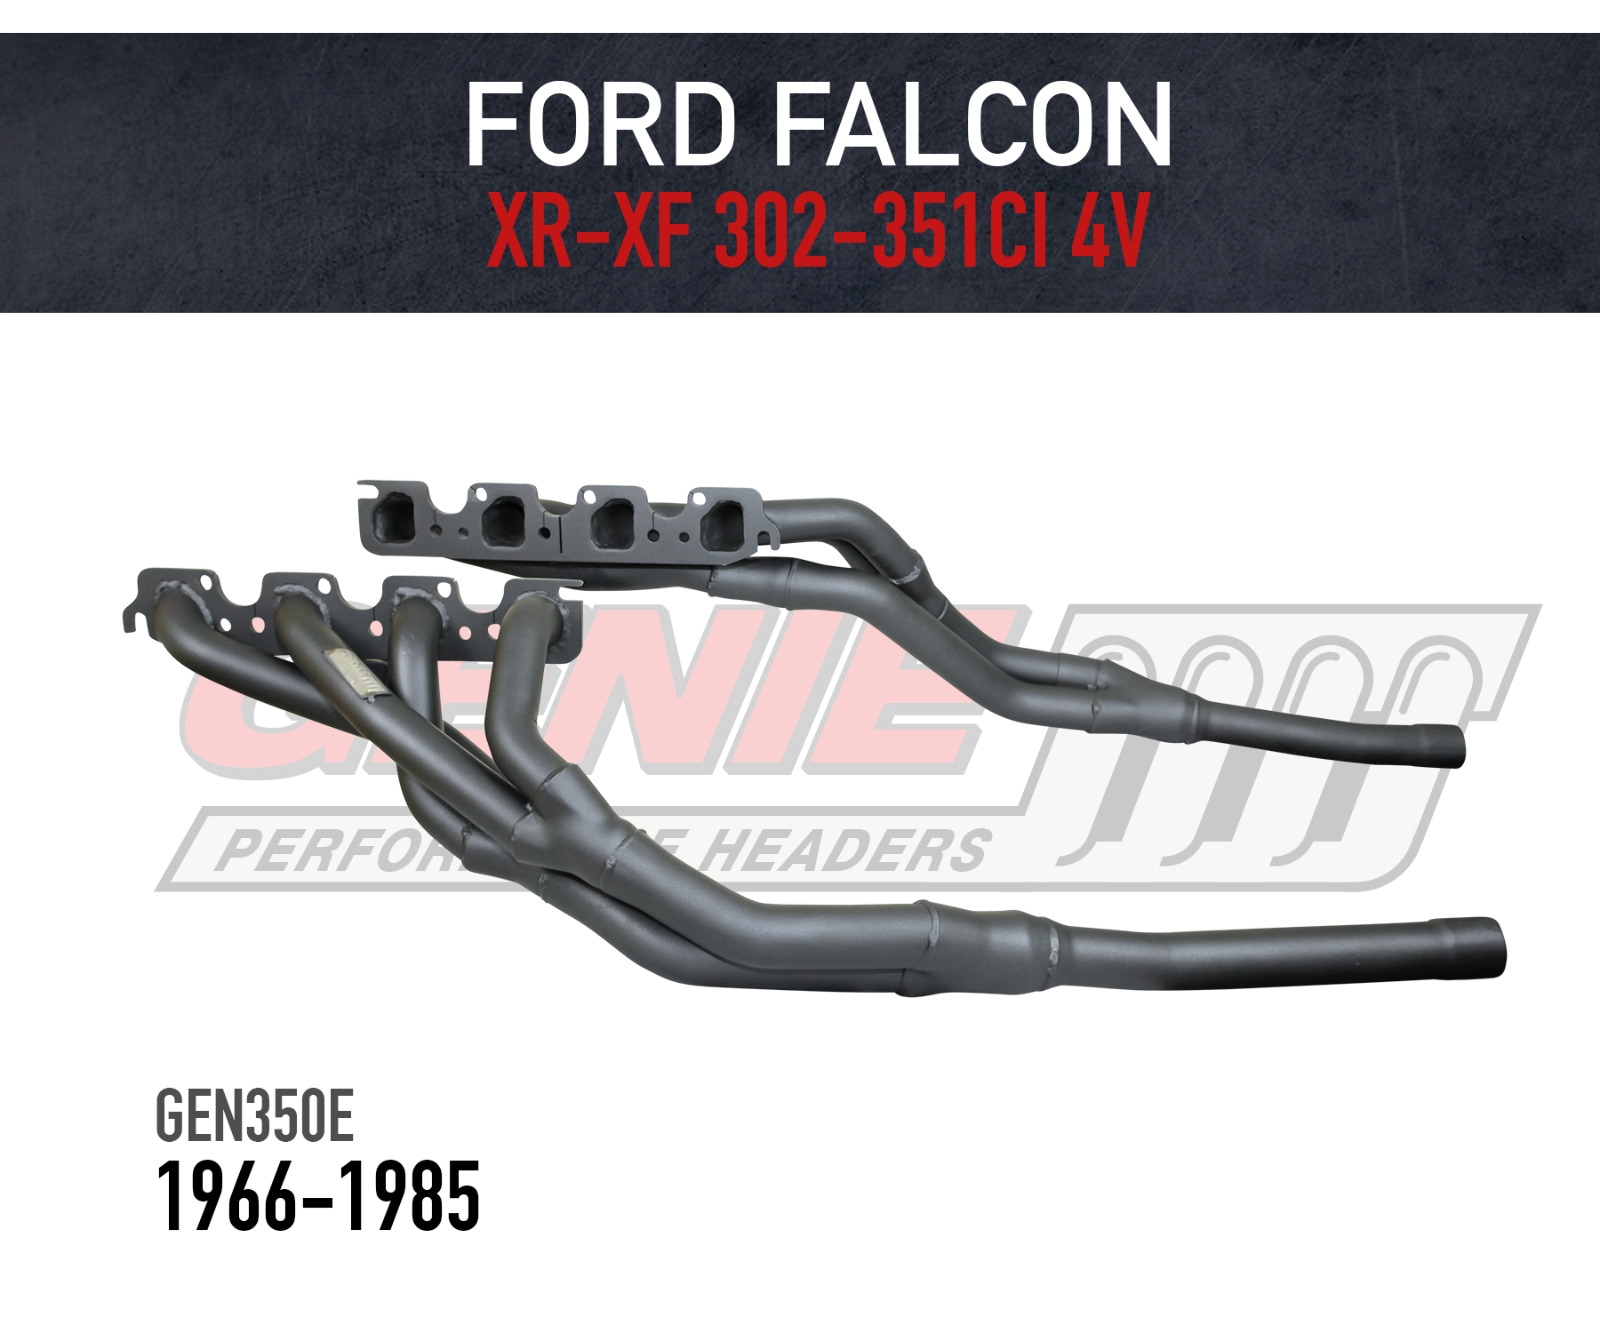 Genie Headers / Extractors to suit Ford Falcon XR-XF V8 TRI-Y 4V Heads